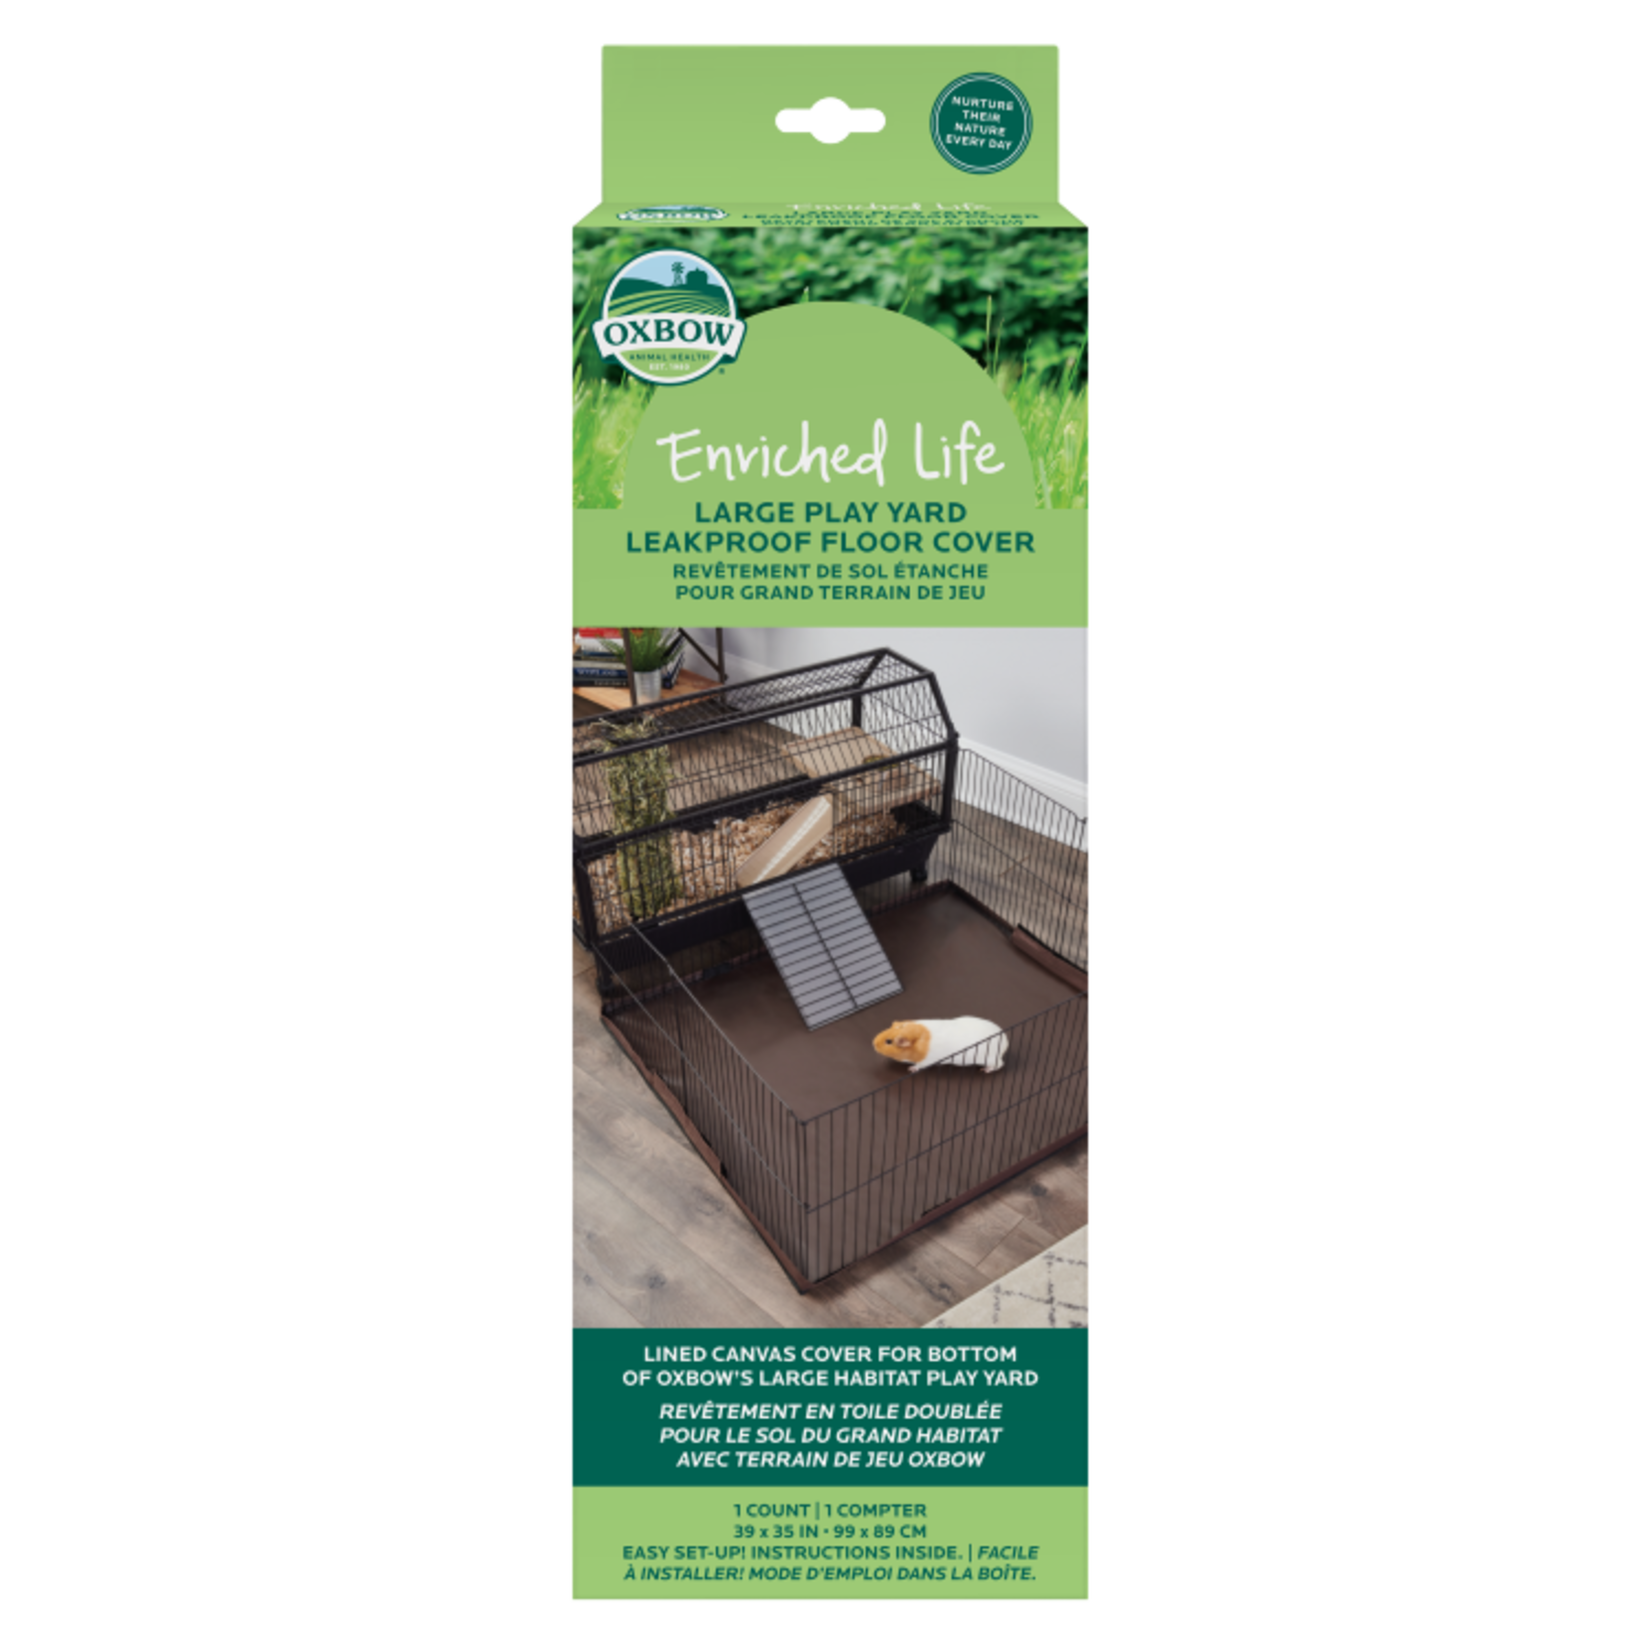 OXBOW ANIMAL HEALTH OXBOW Enriched Life Large Play Yard Leakproof Floor Cover